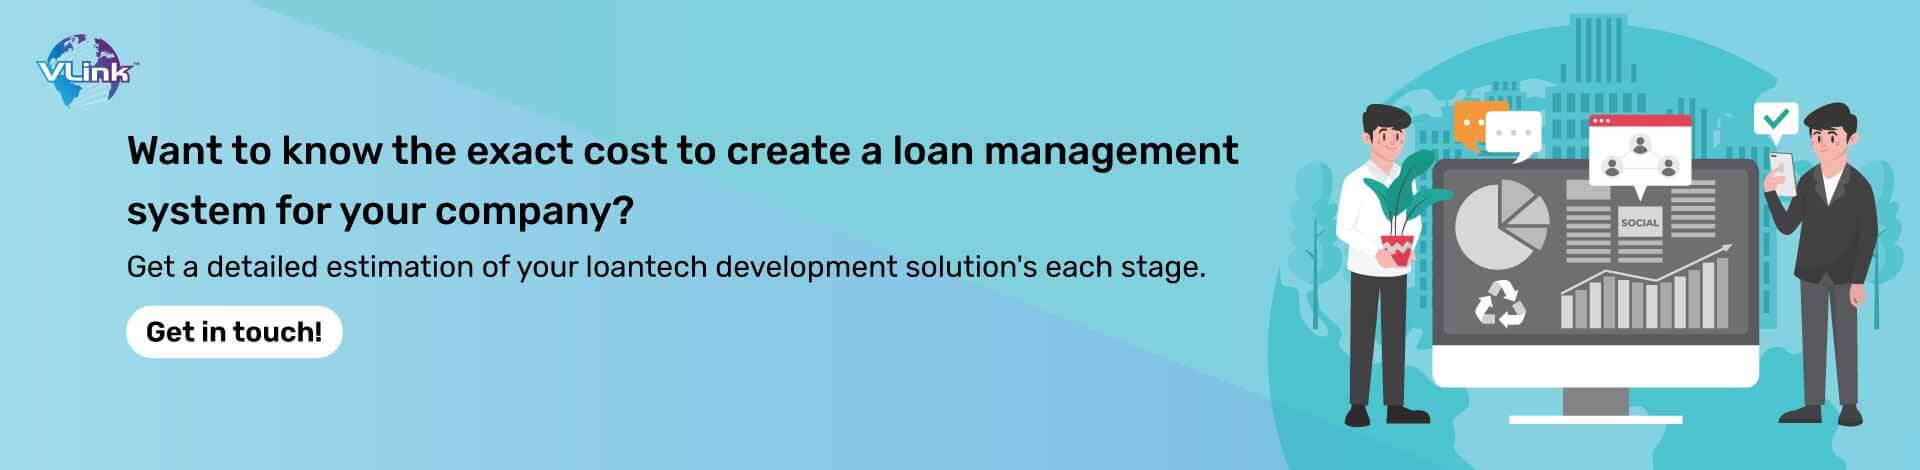 How to Build a Loan Management System-CTA1